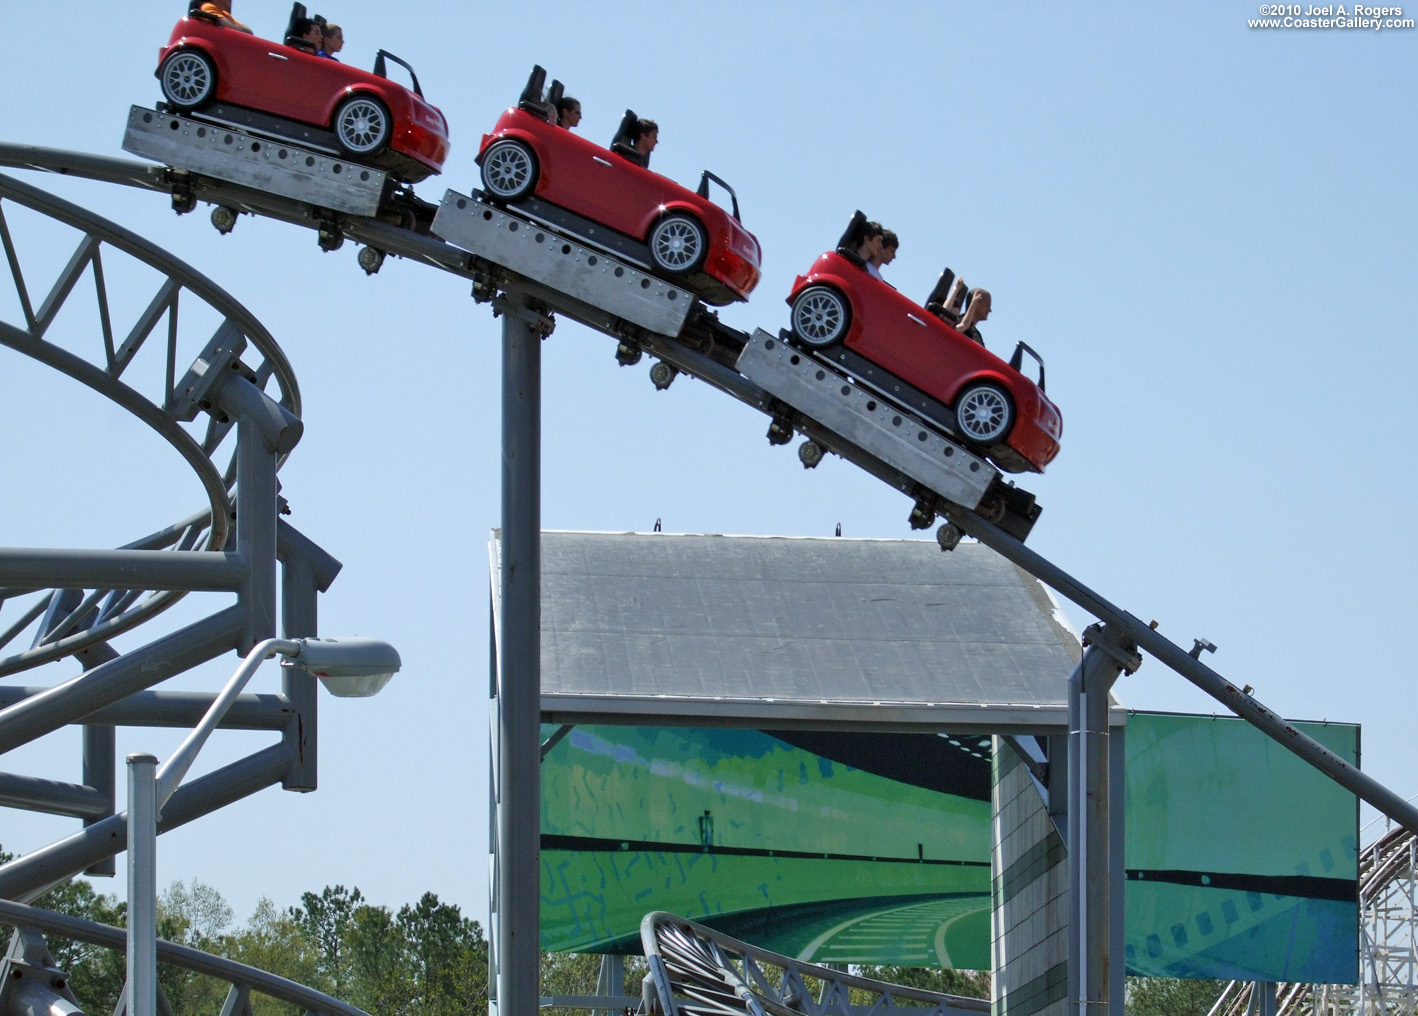 BMW Mini Cooper cars on a roller coaster